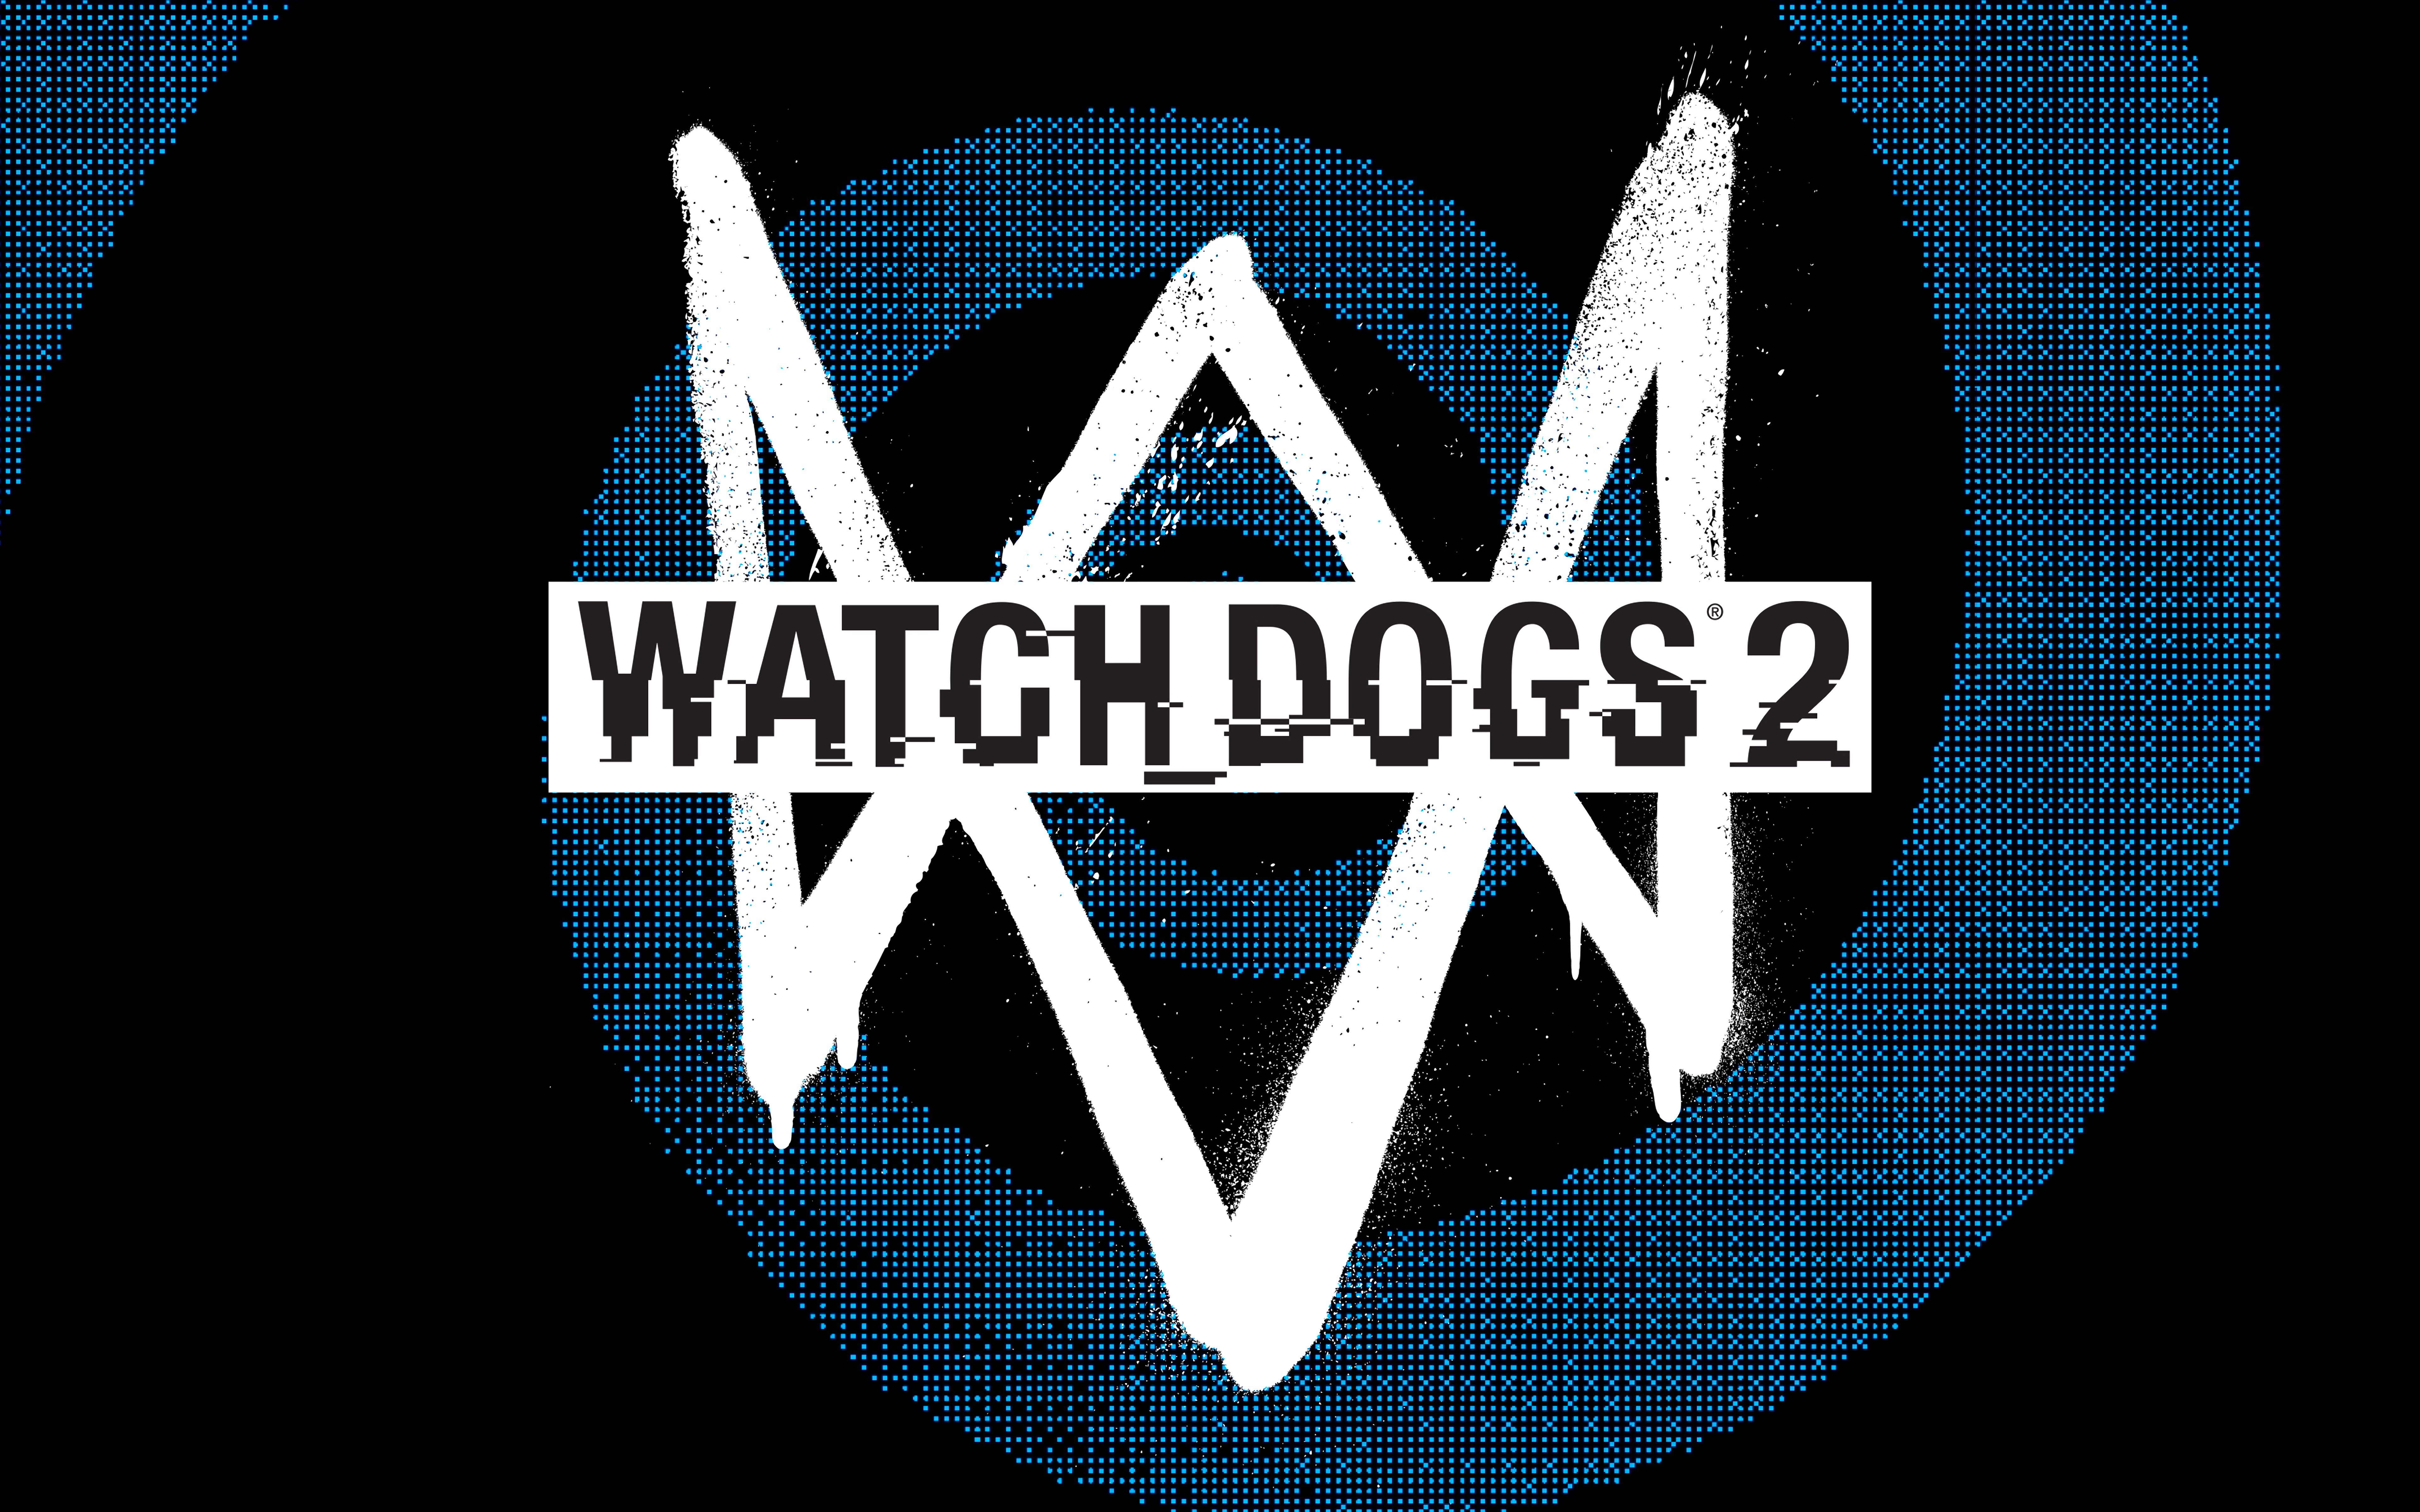 Watch Dogs Wallpaper Image Photos Pictures Background